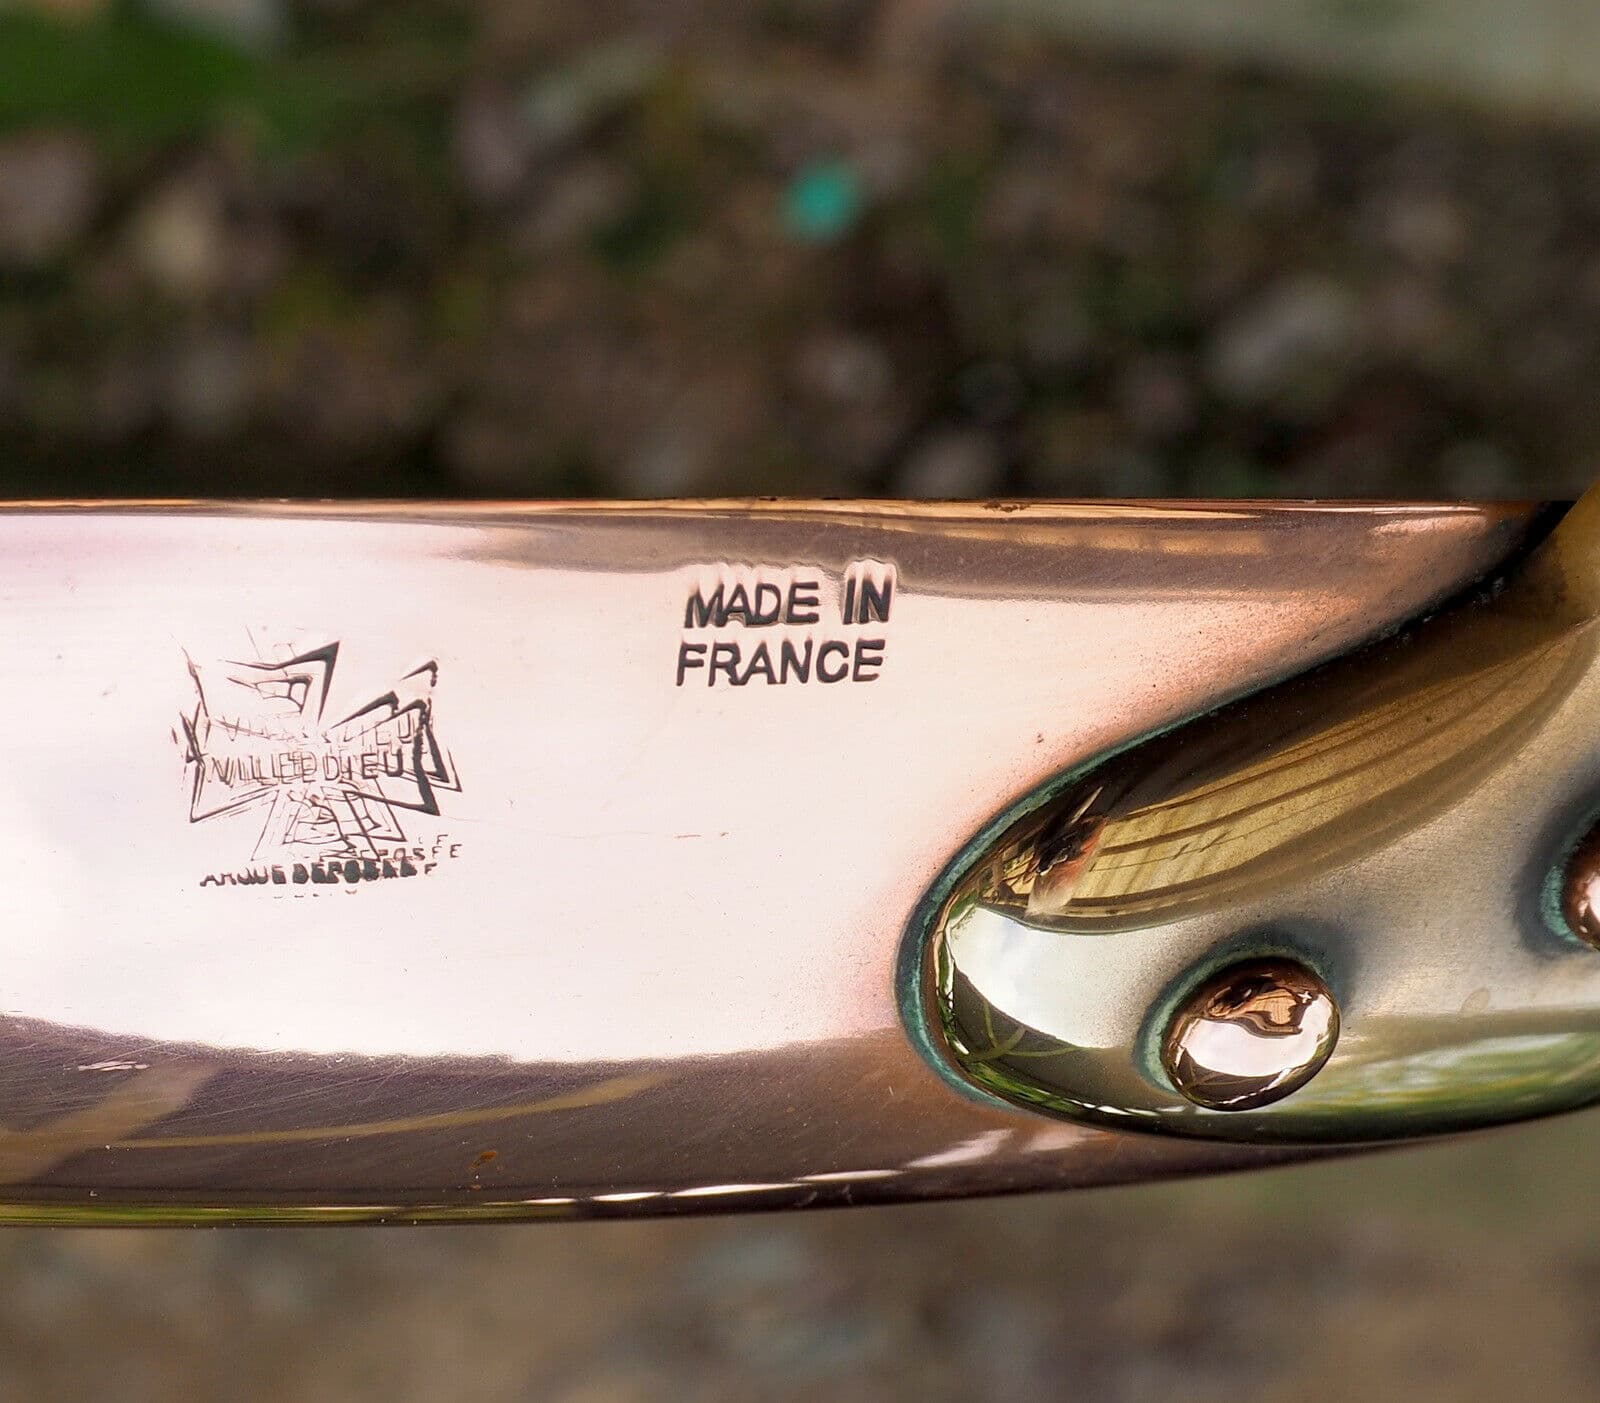 “Made in France”